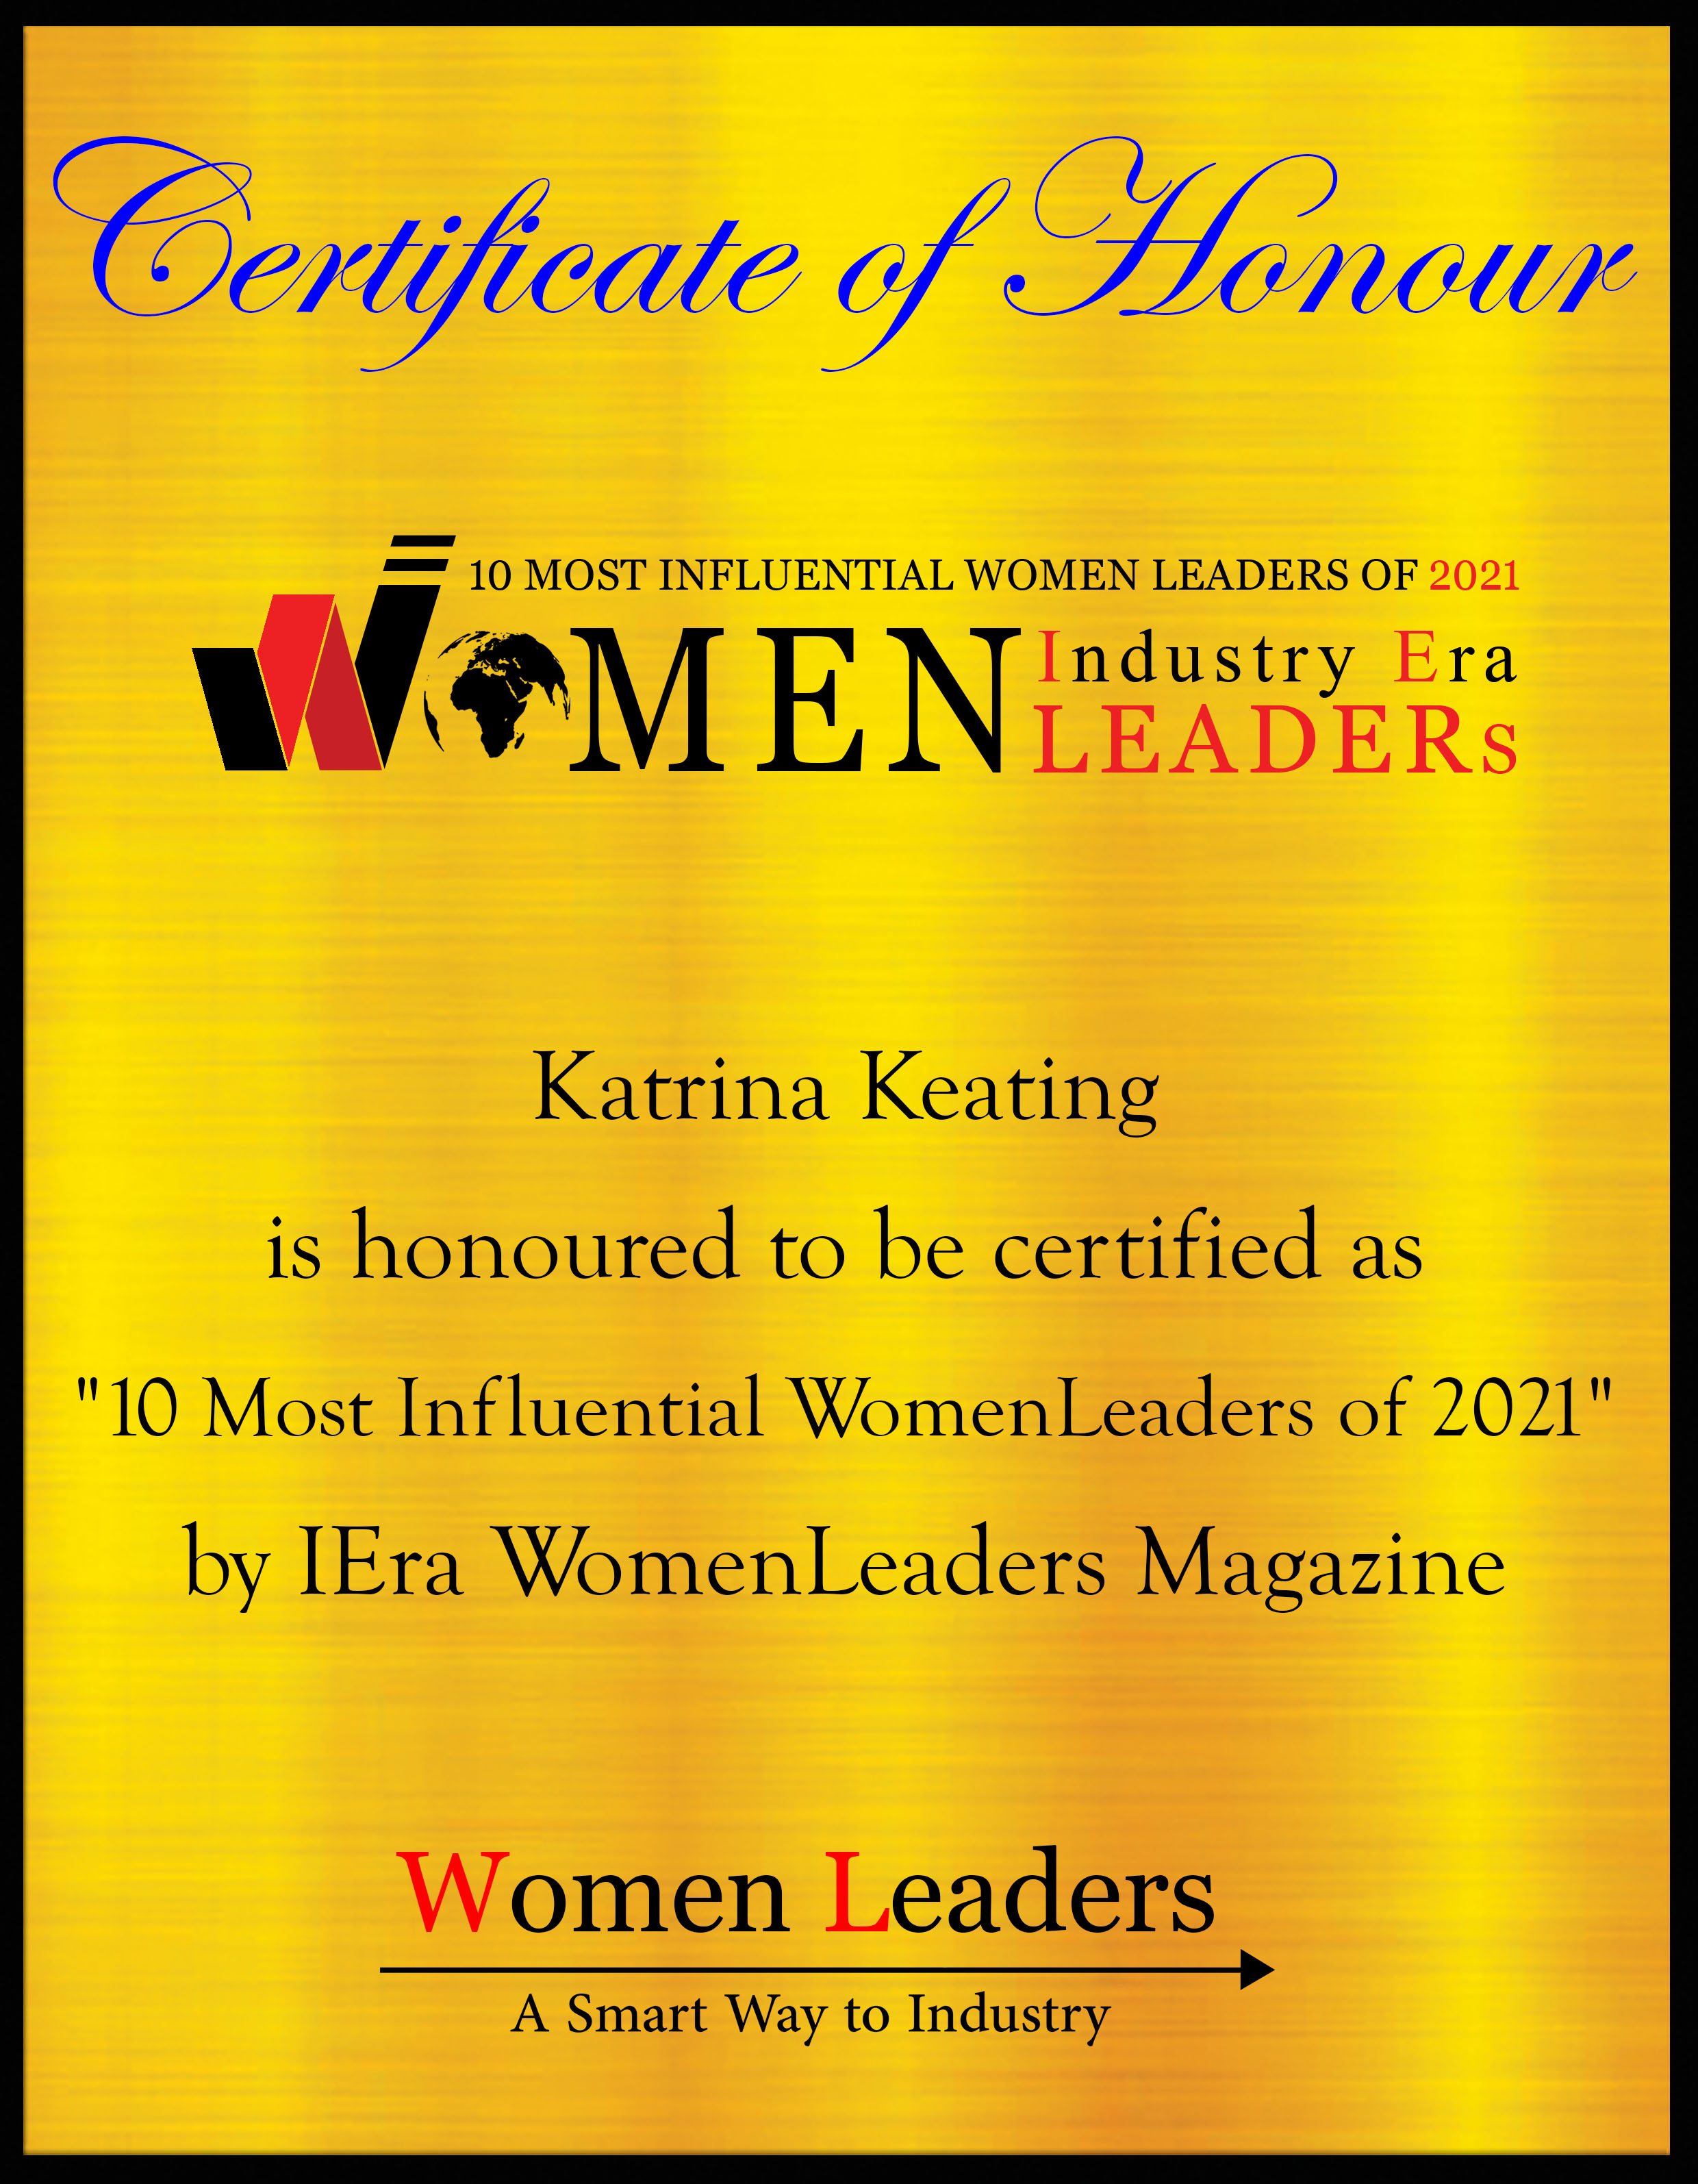 Katrina Keating, Executive Director of The Community Center at Visitation, Most Influential WomenLeaders of 2021